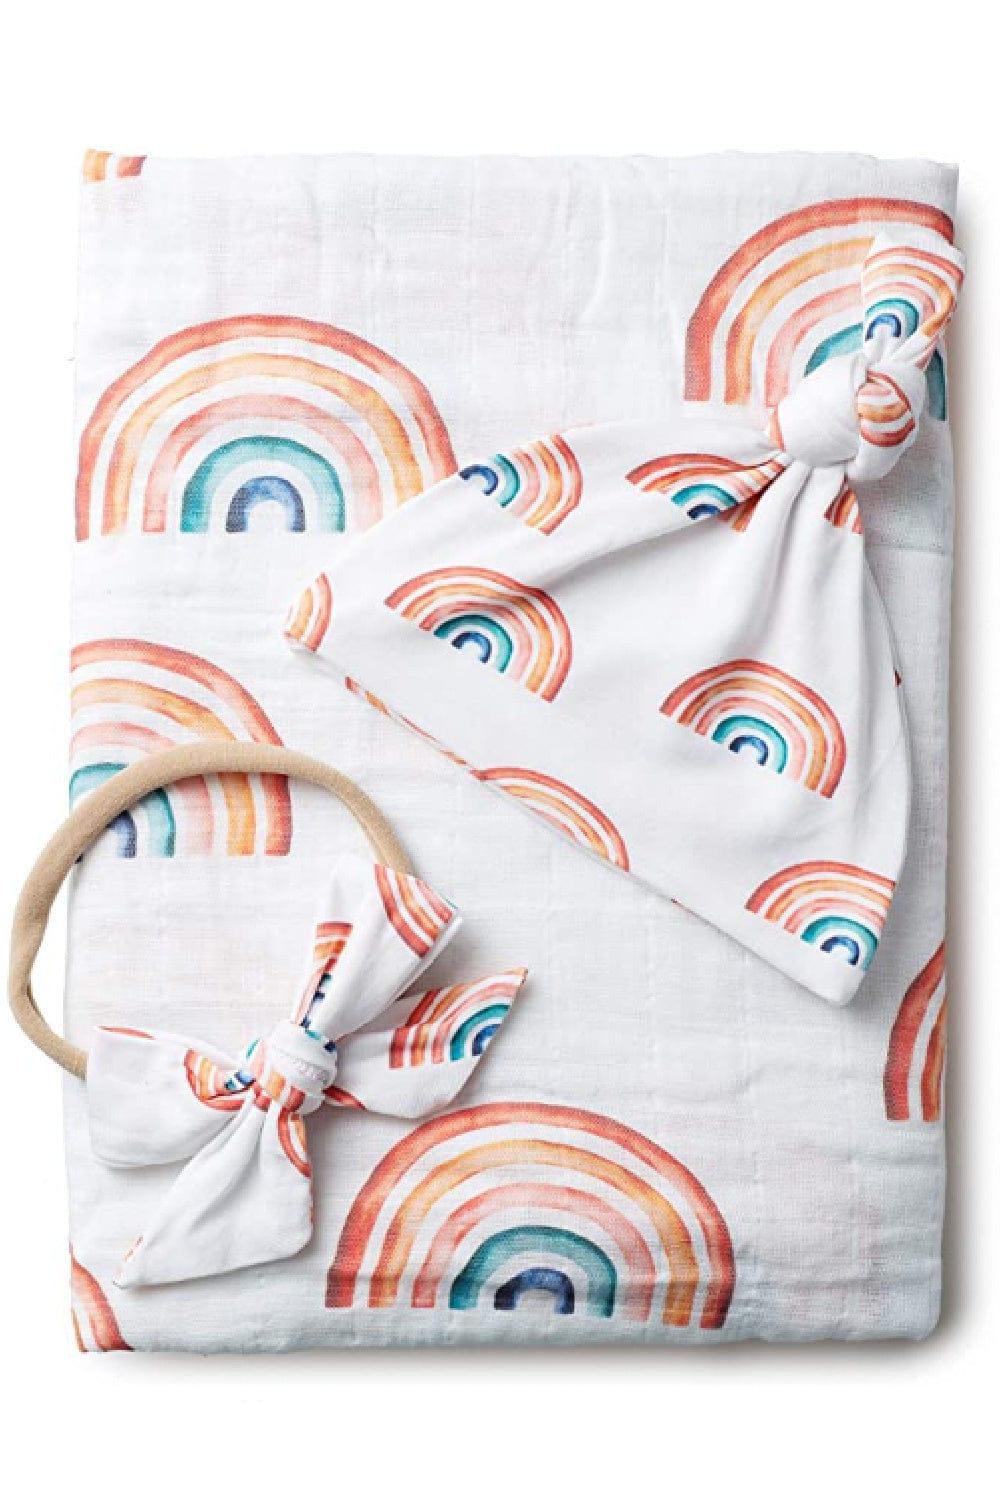 Rainbow baby swaddling blanket with matching newborn hat and bow.